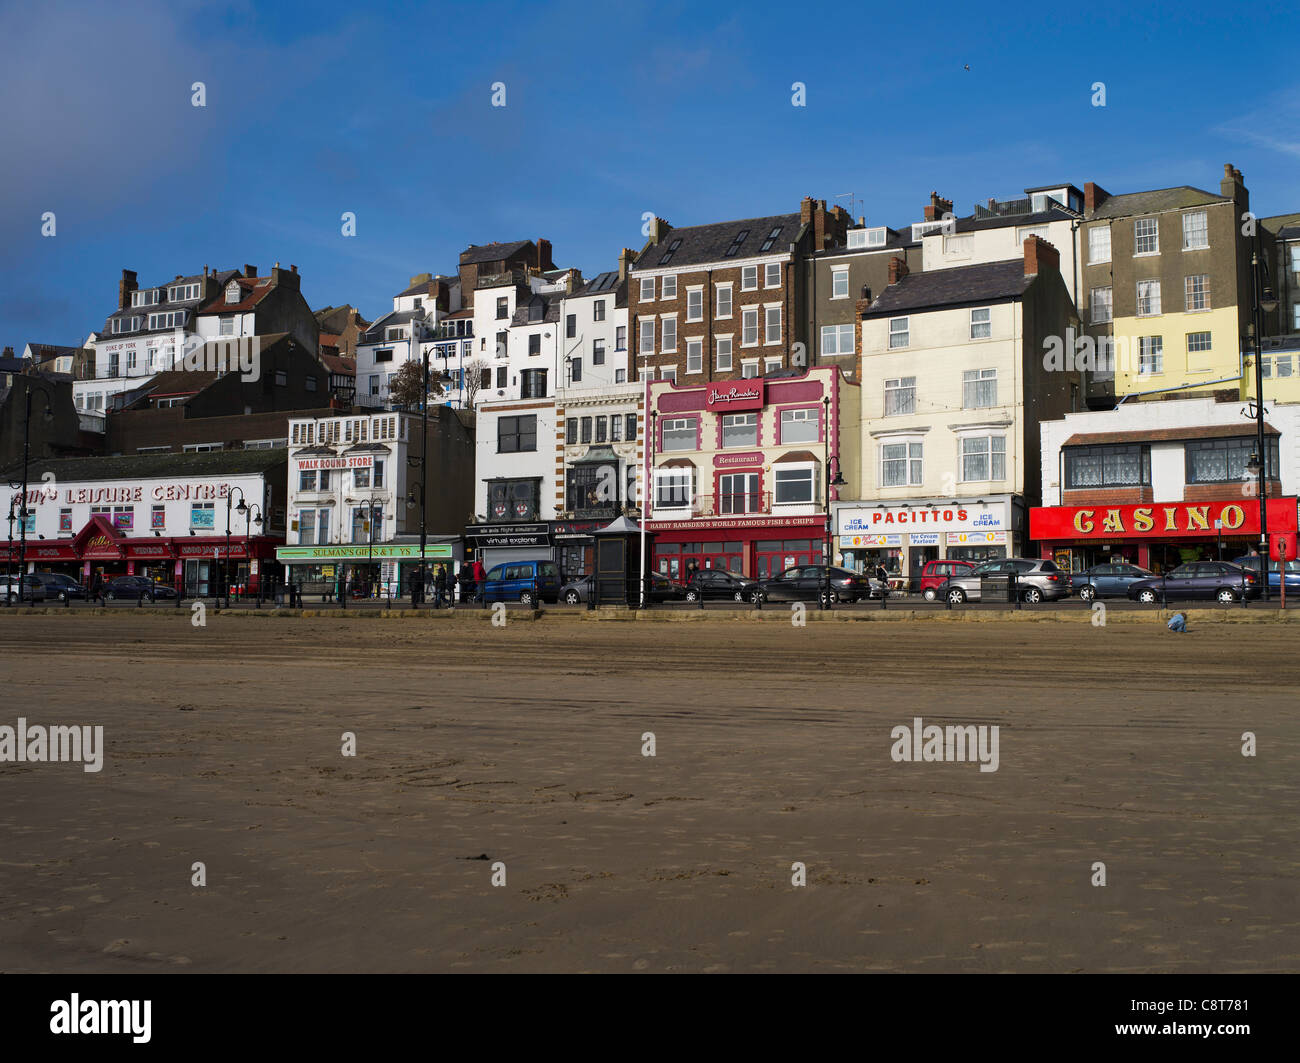 dh South Bay SCARBOROUGH NORTH YORKSHIRE Seaside town Scarborough seafront beach amusements uk britain traditional waterfront sea front Stock Photo